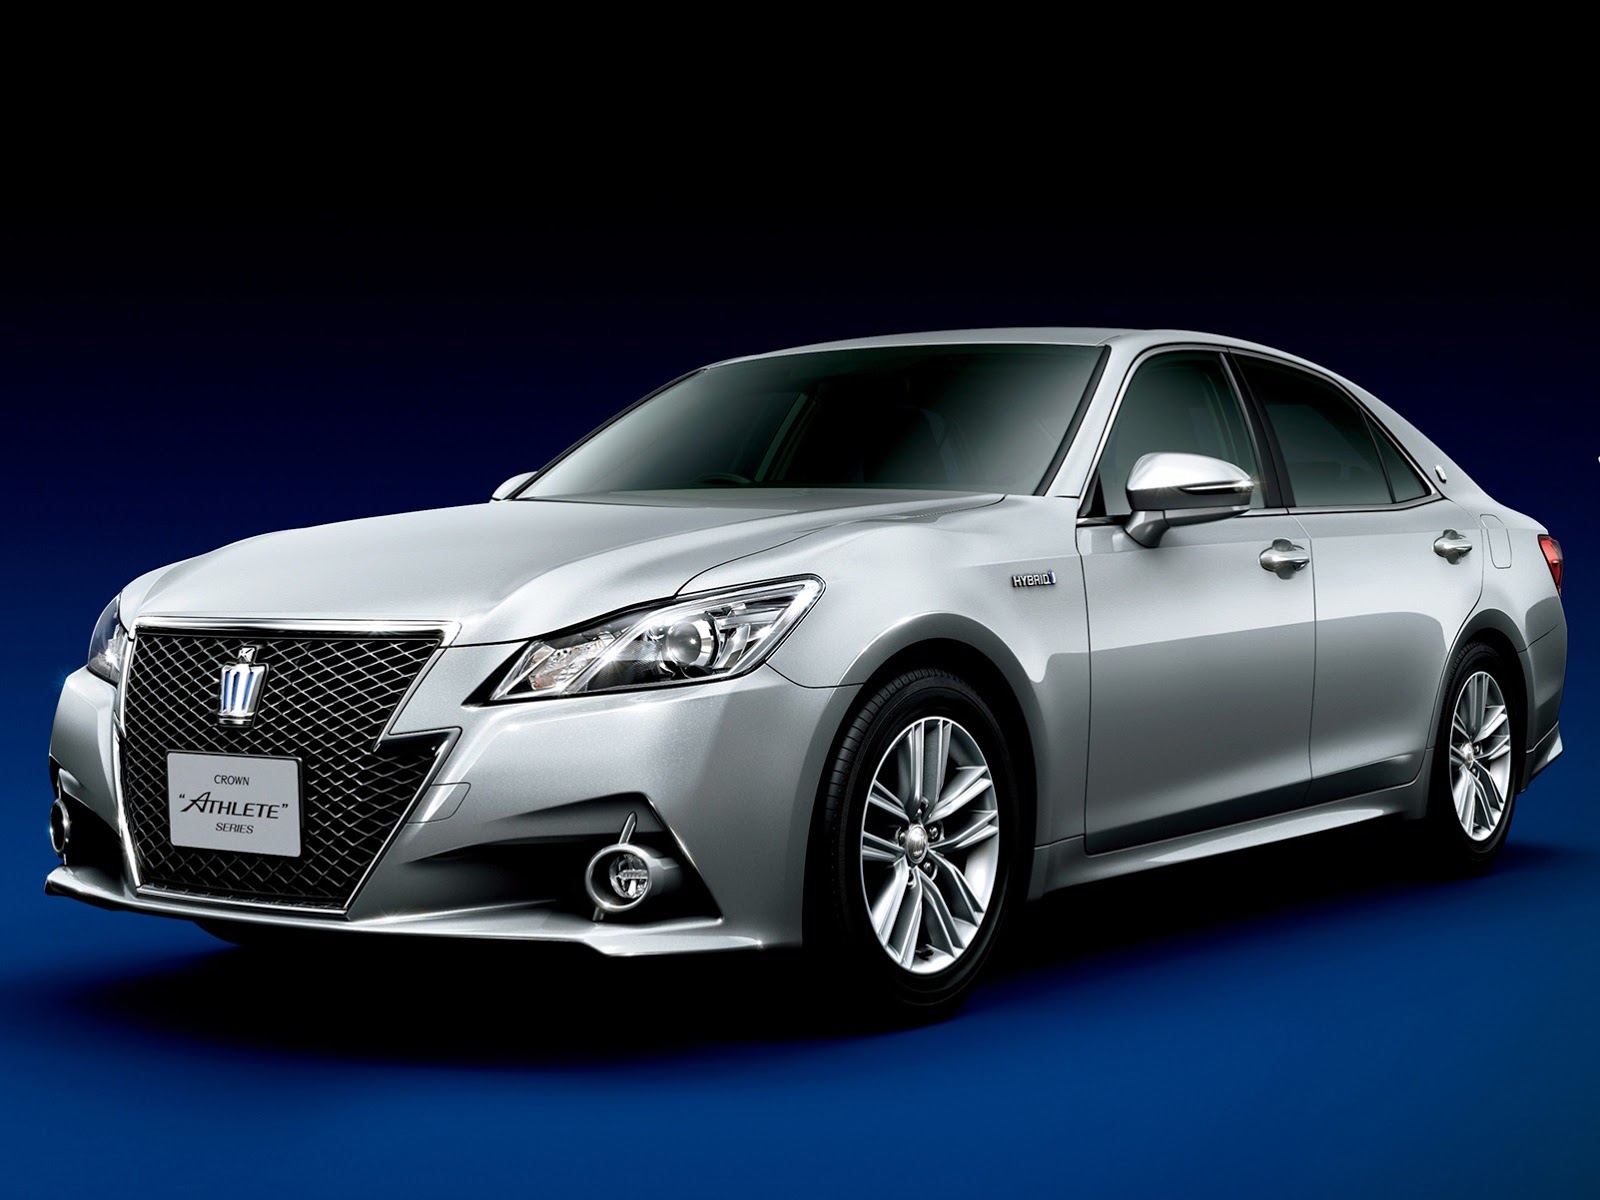 2013 Toyota Crown Royal and Athlete Revealed - autoevolution